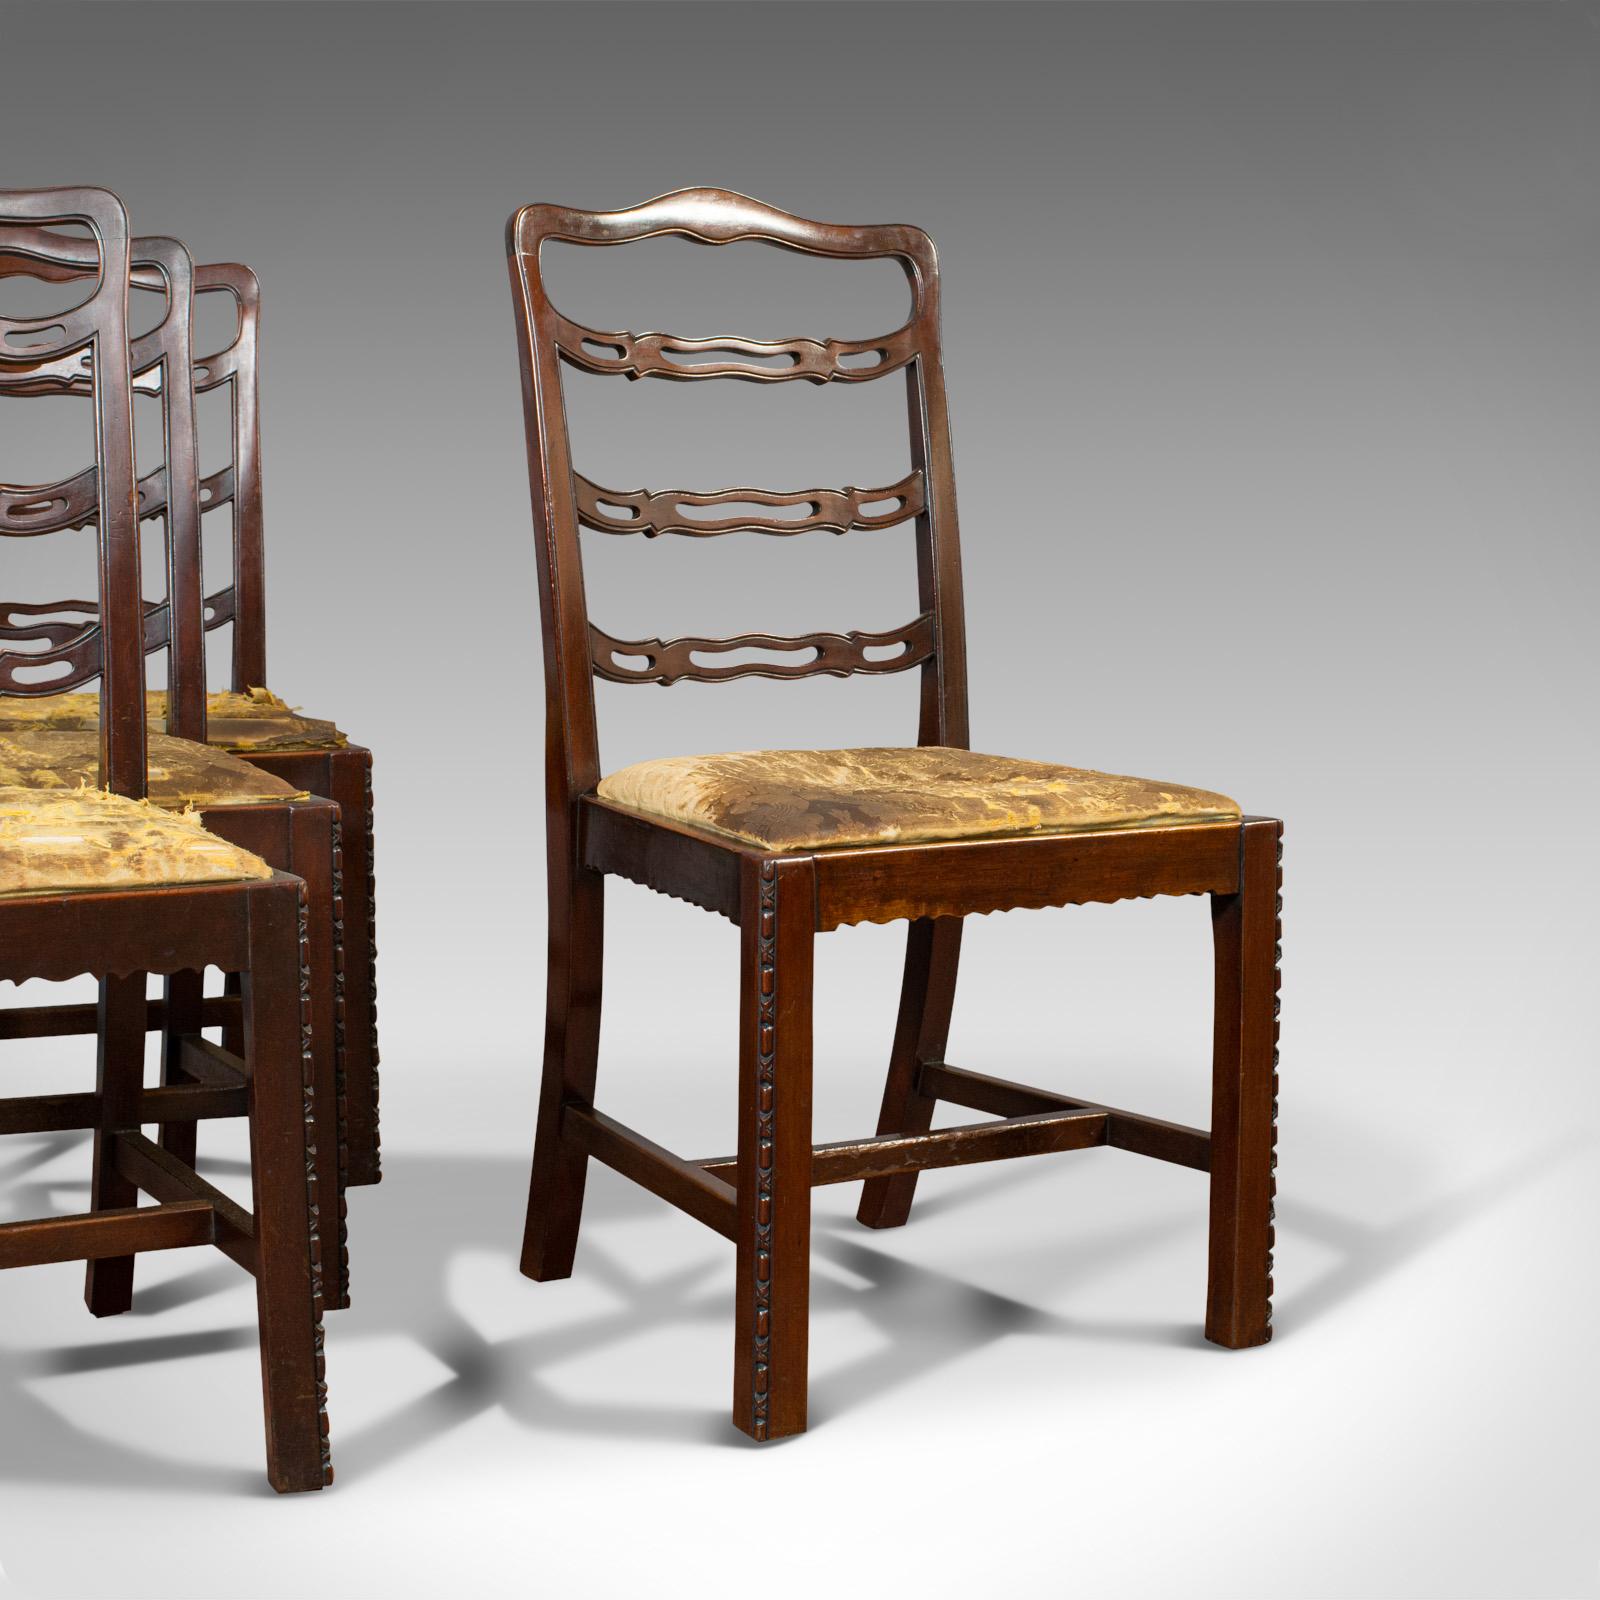 This is a set of 4 antique ladder back chairs. An Irish, mahogany dining seat, dating to the late Victorian period, circa 1880.

Wonderful frames, prime for reupholstering
Displaying a desirable aged patina
Mahogany shows fine grain interest and